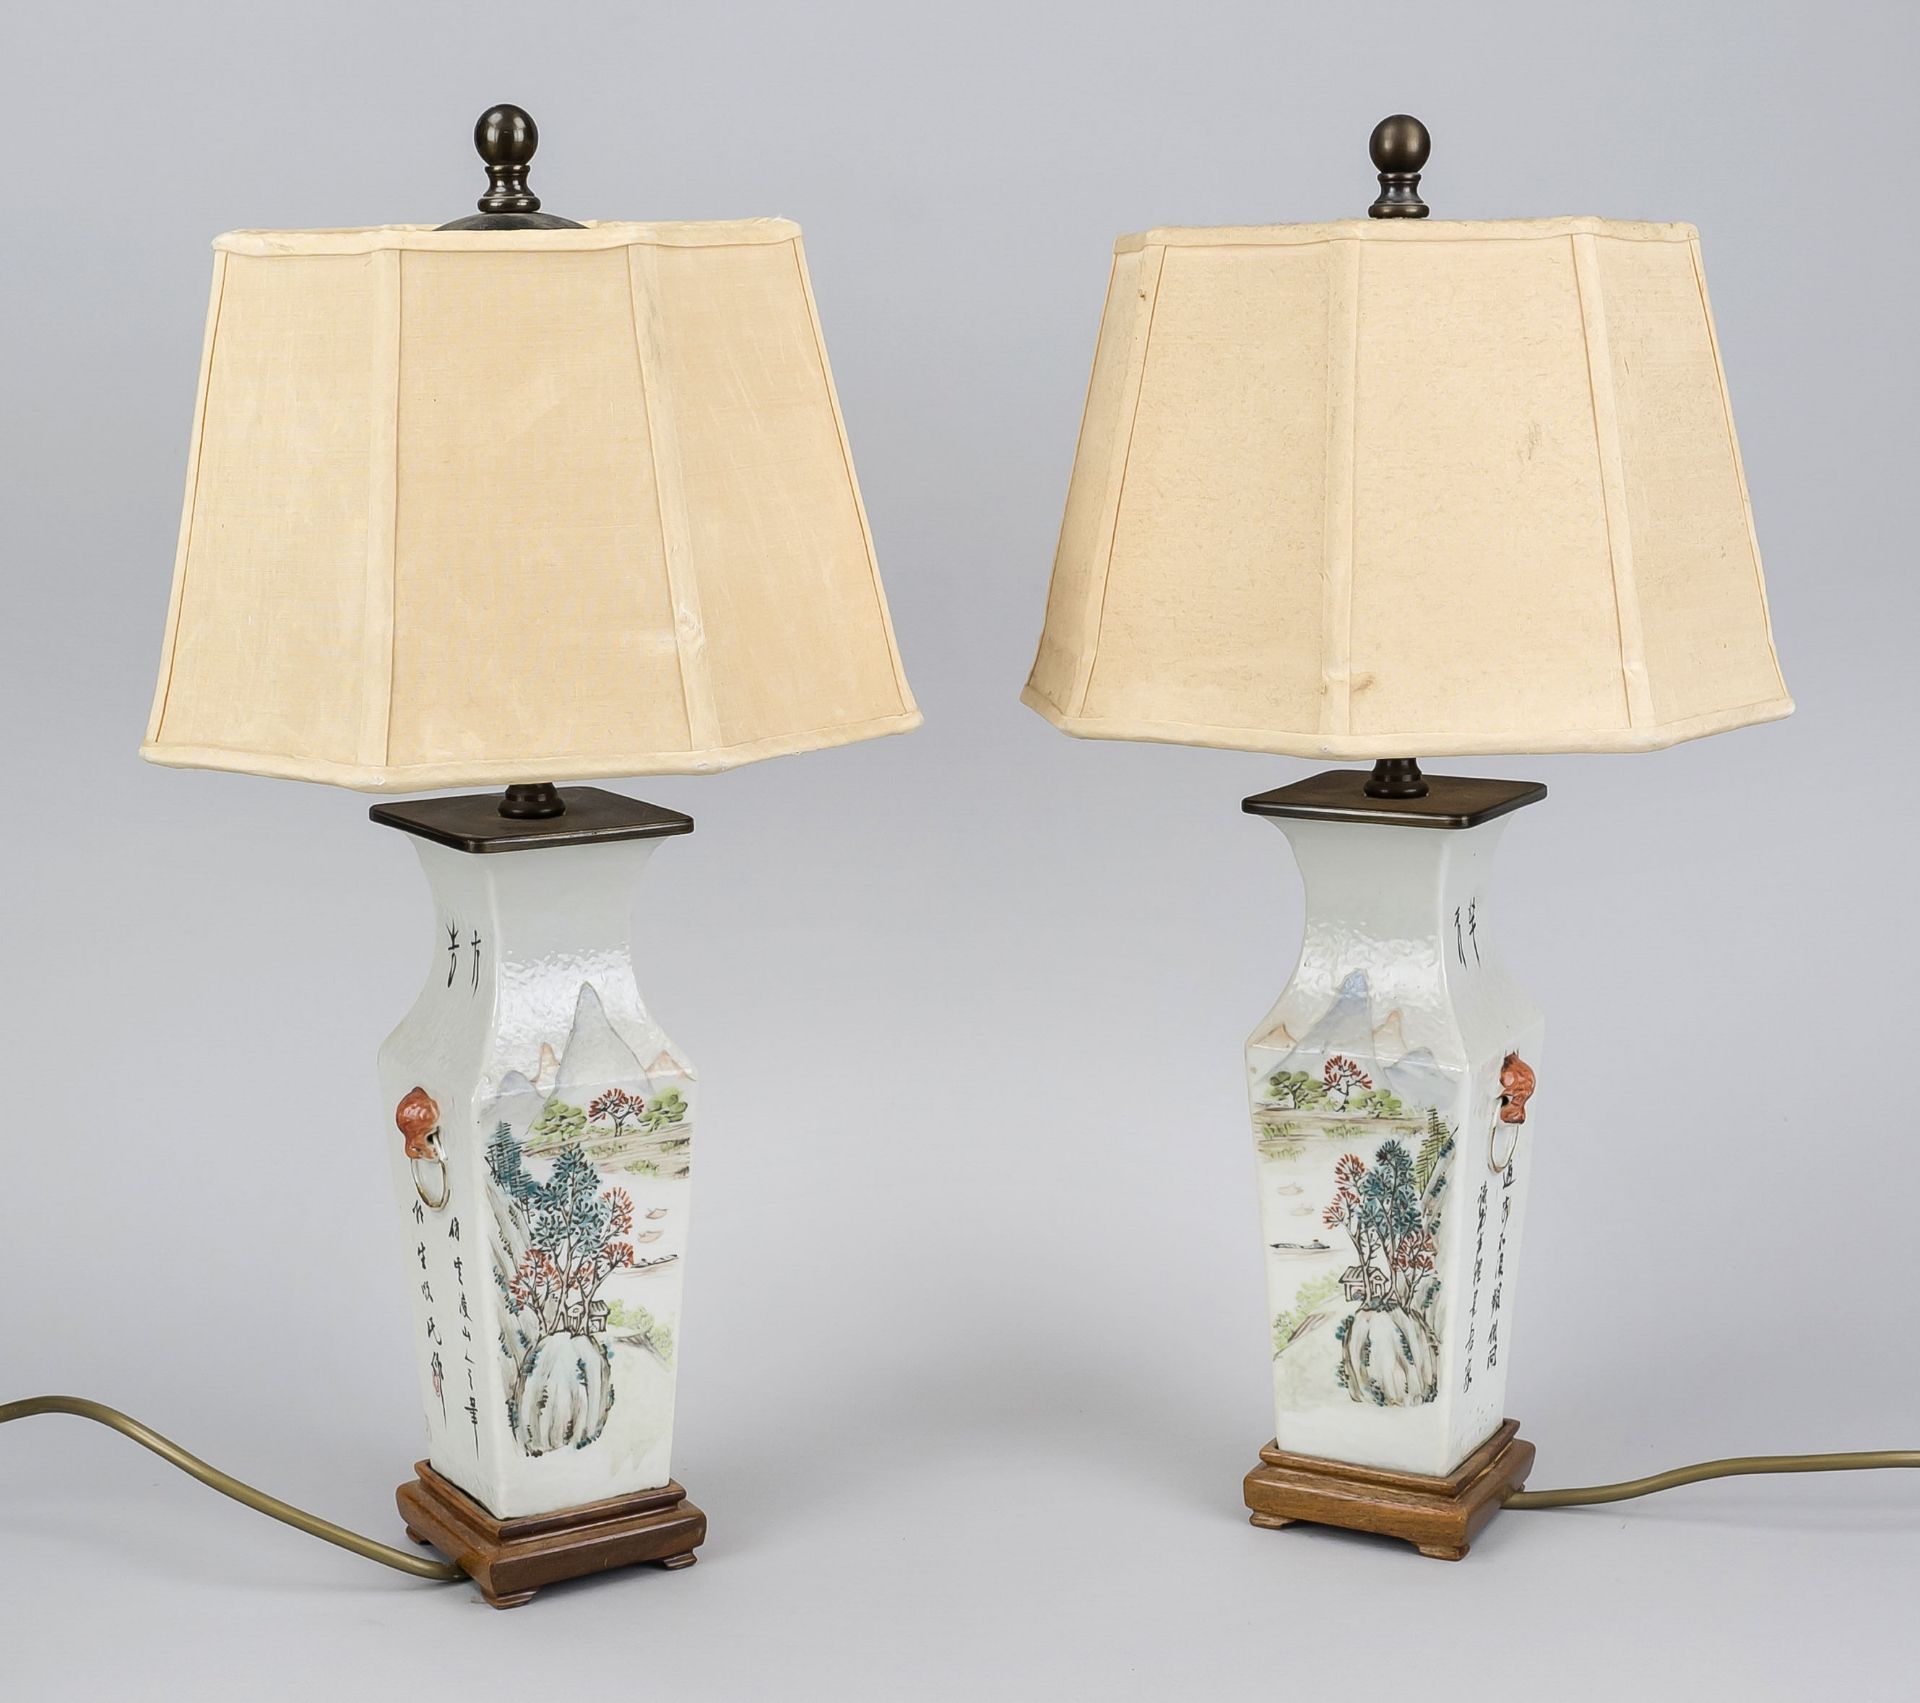 A pair of square vases mounted as lamps, China, late Qing. All sides painted opposite each other